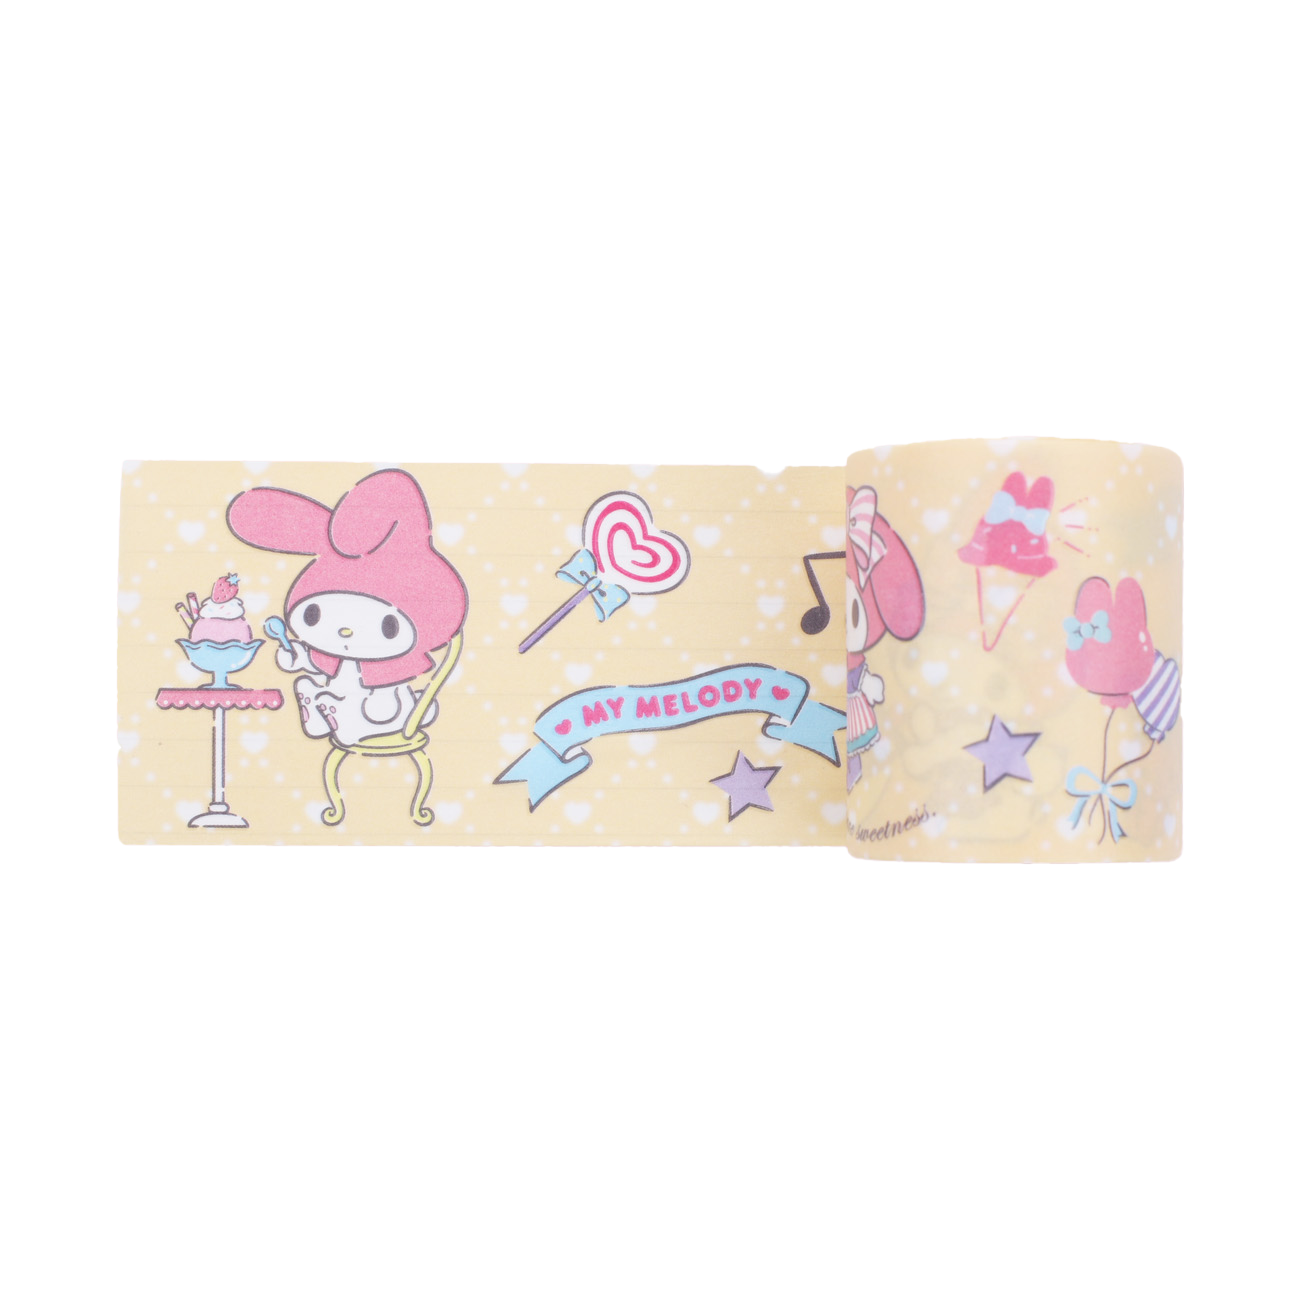 Sanrio Paper Tape Set of 2 - My Melody